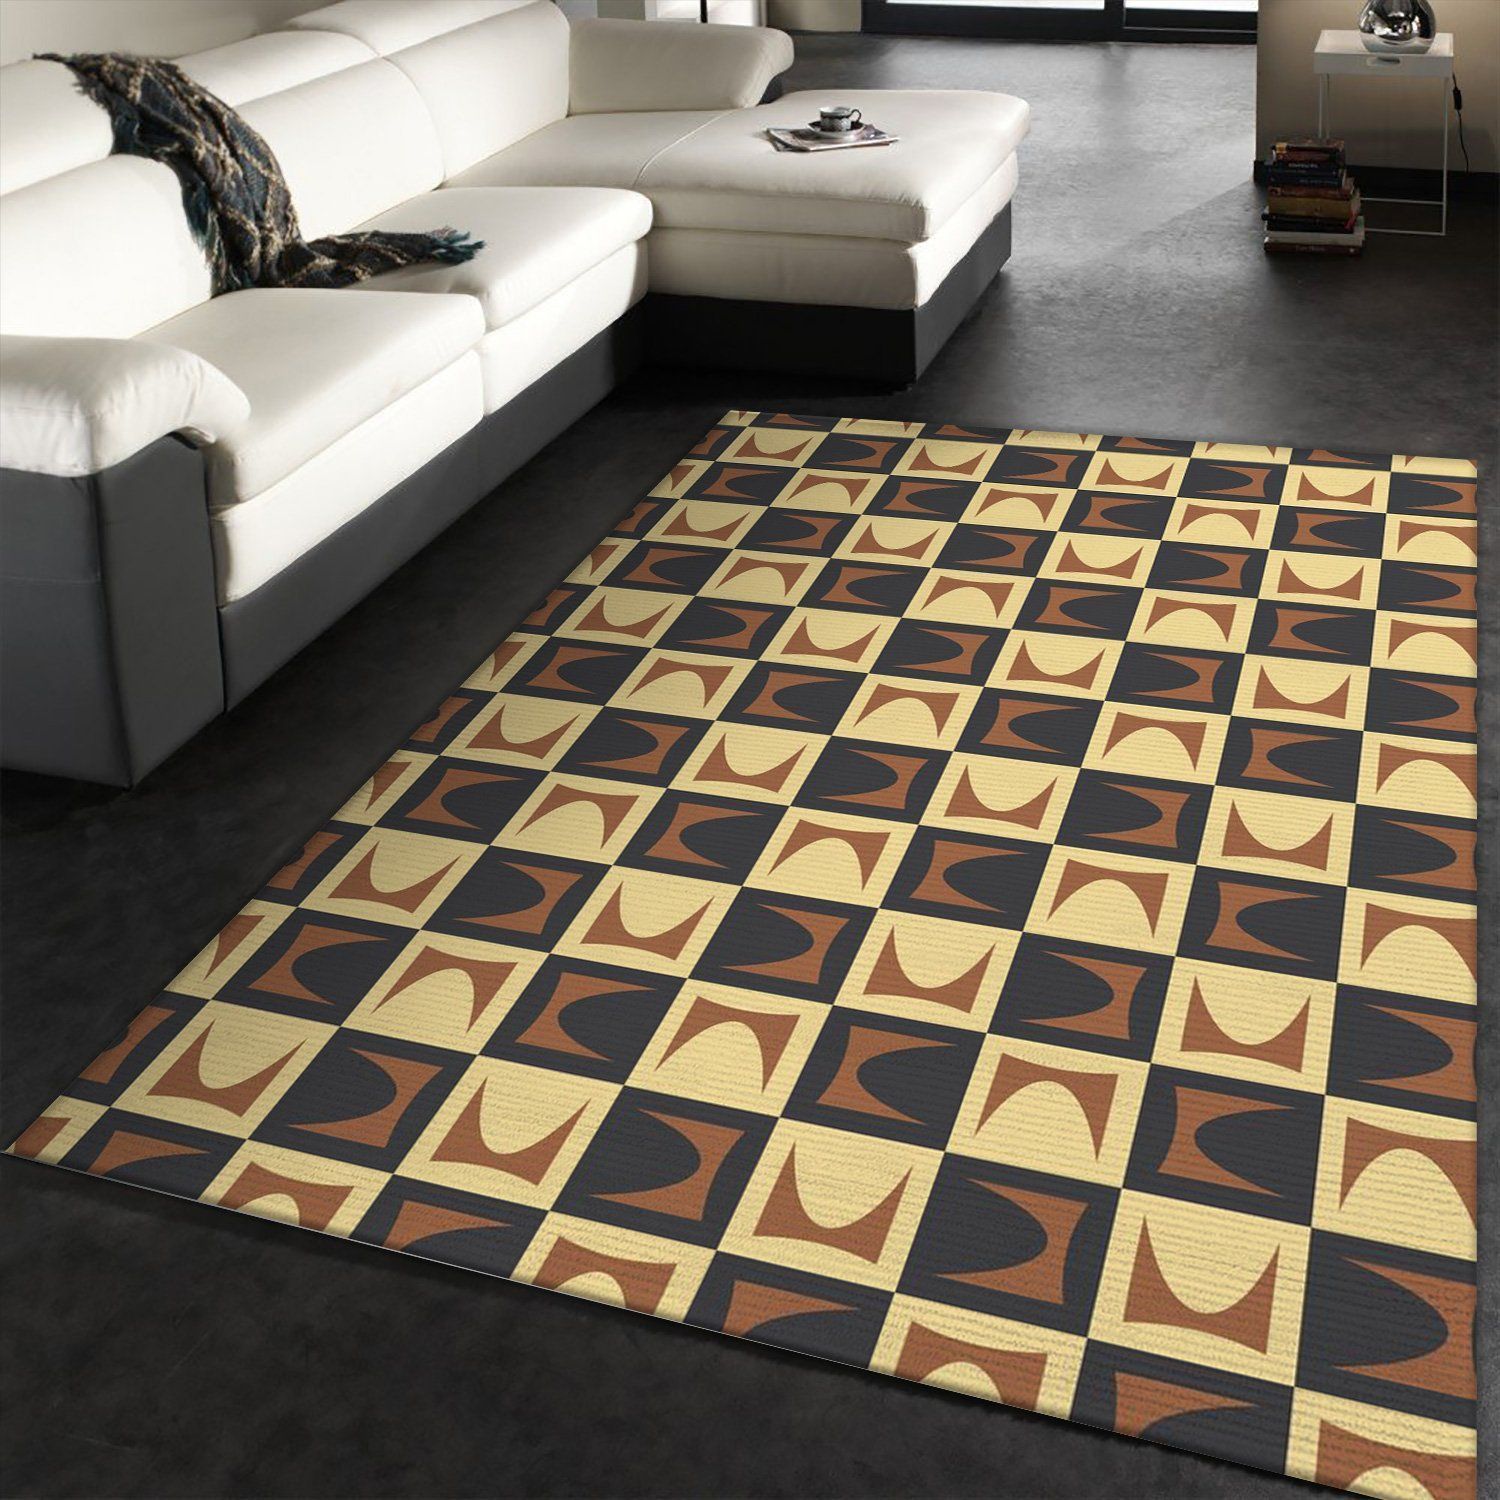 Midcentury Pattern 28 Area Rug For Christmas, Gift for fans, Home Decor Floor Decor - Indoor Outdoor Rugs